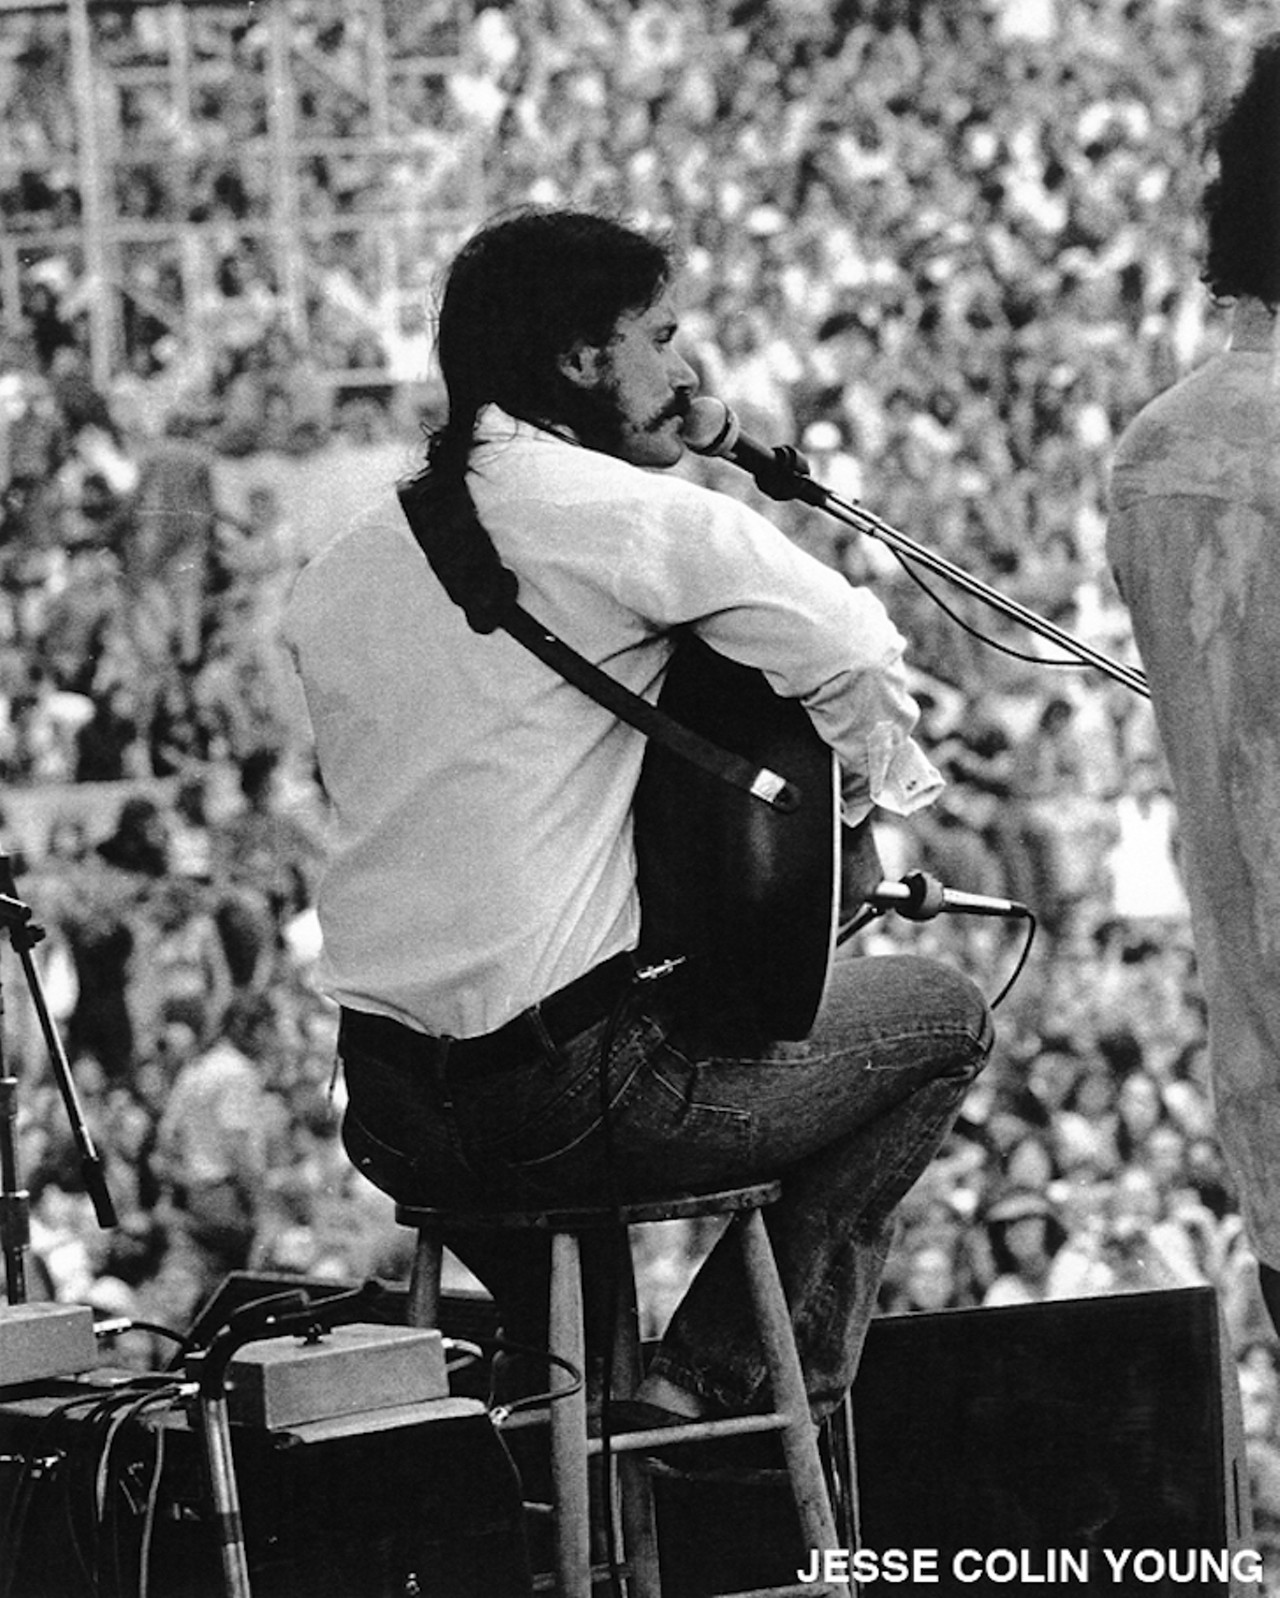 Jesse Colin Young - Aug. 23, 1974 - Tampa Stadium